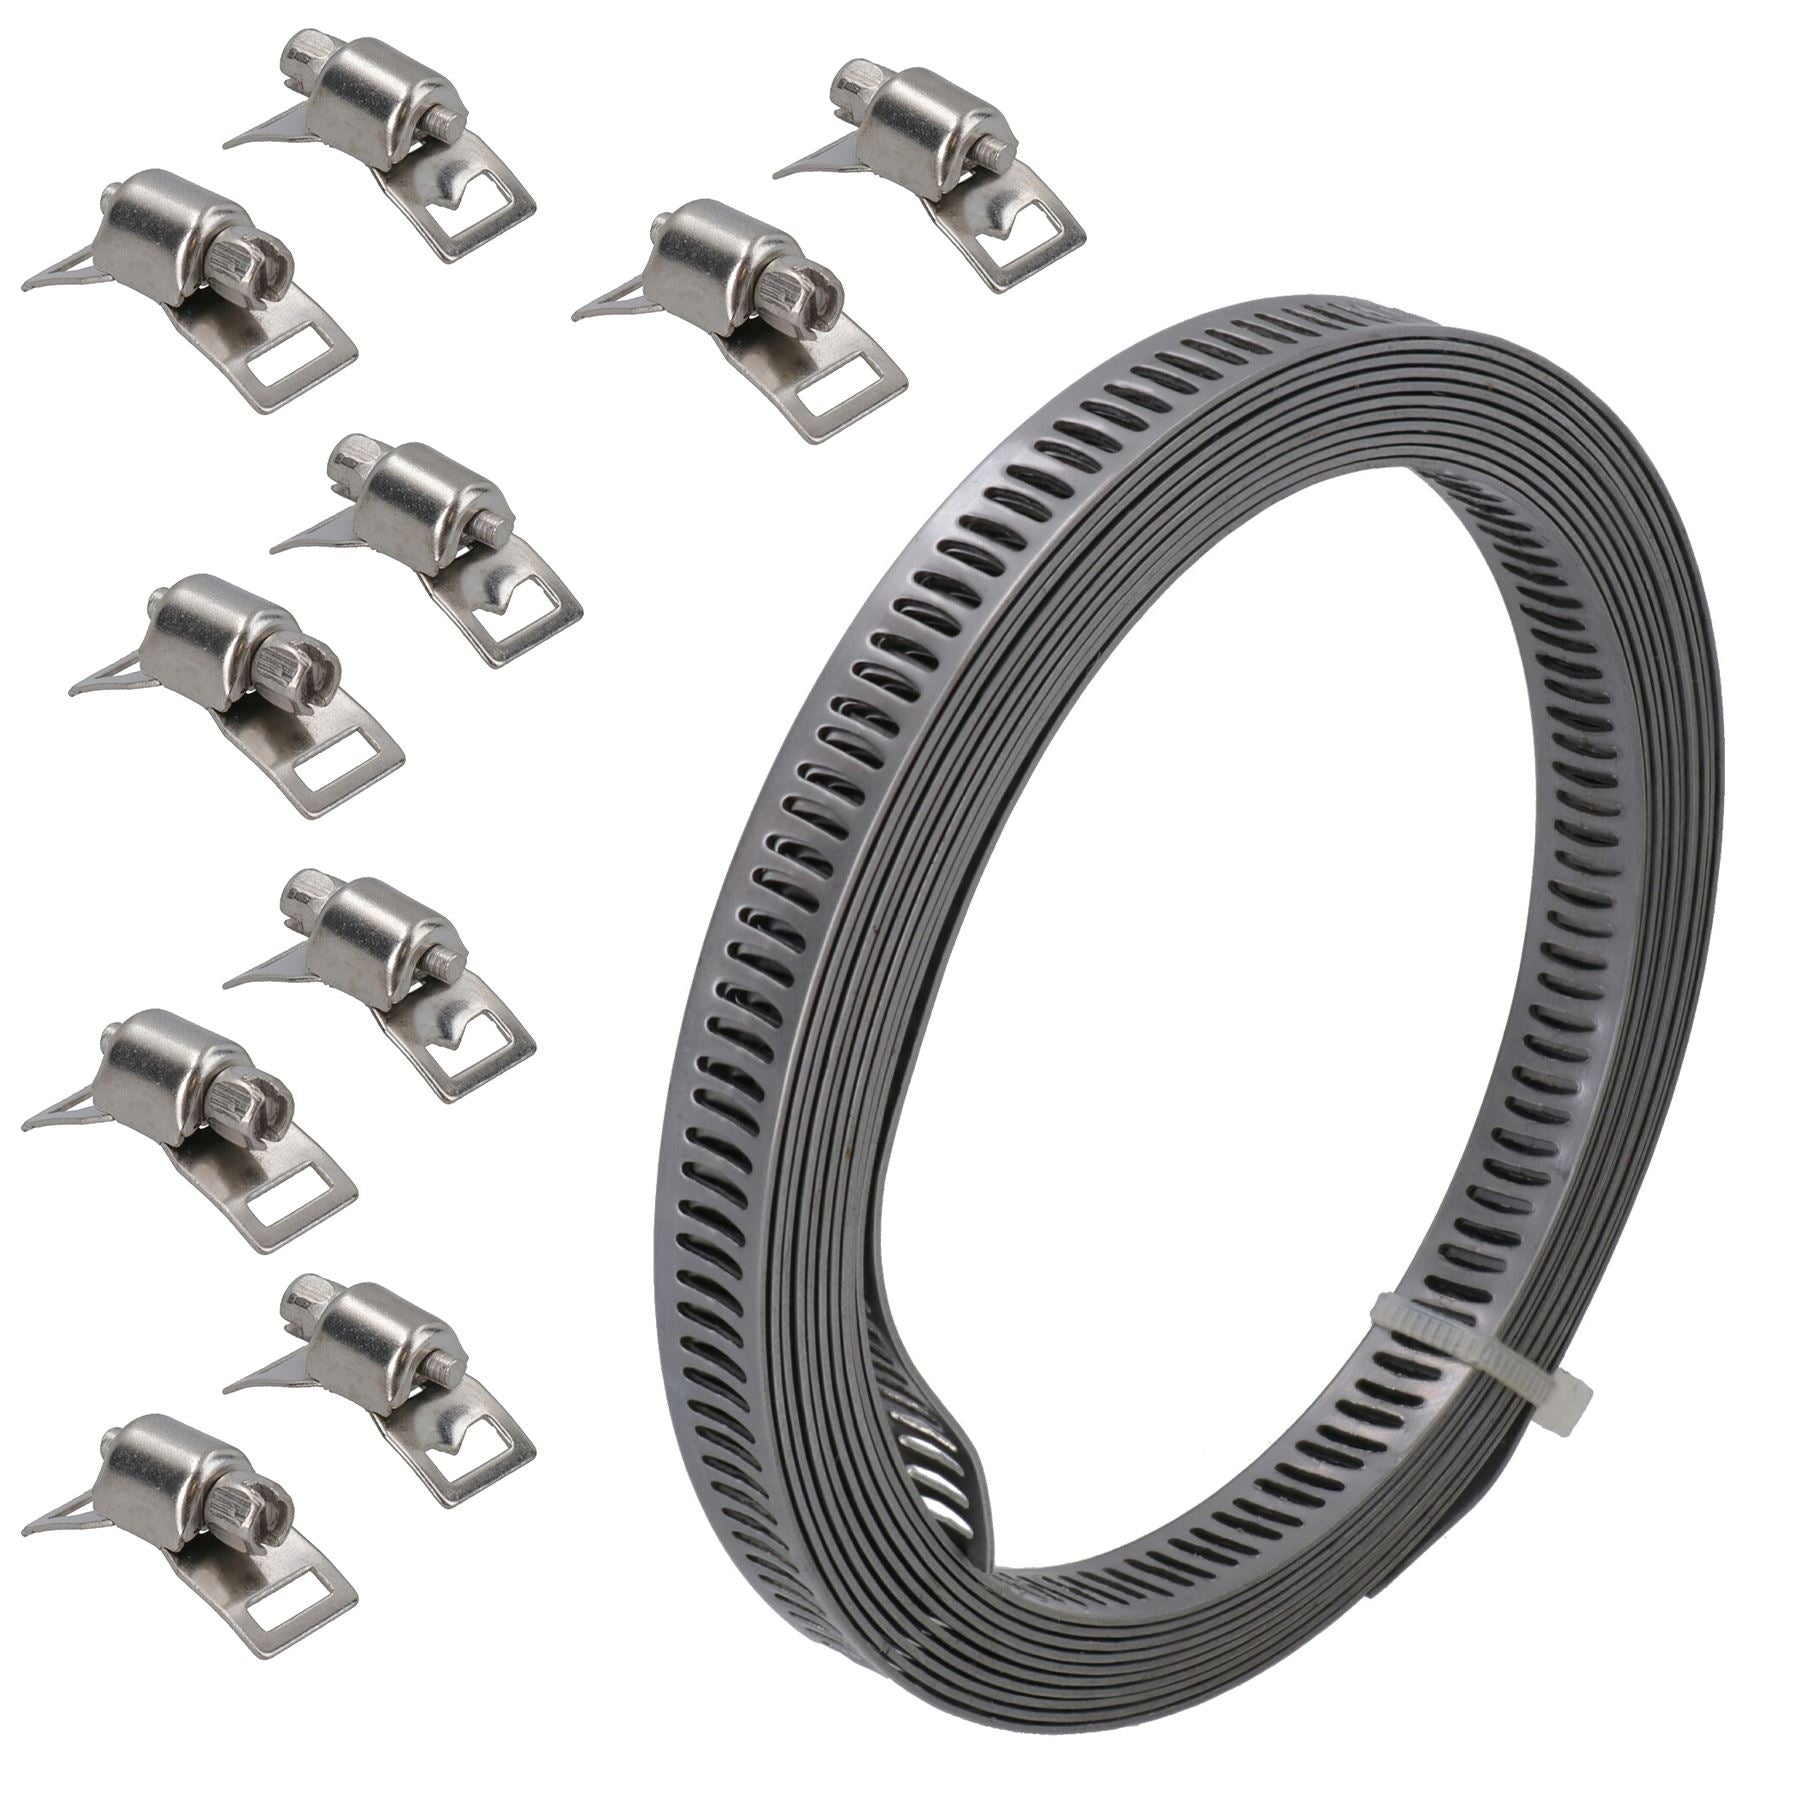 Cut To Size Stainless Steel Hose Clamp Set 2.5mtr Long With 8 Tensioning Clips